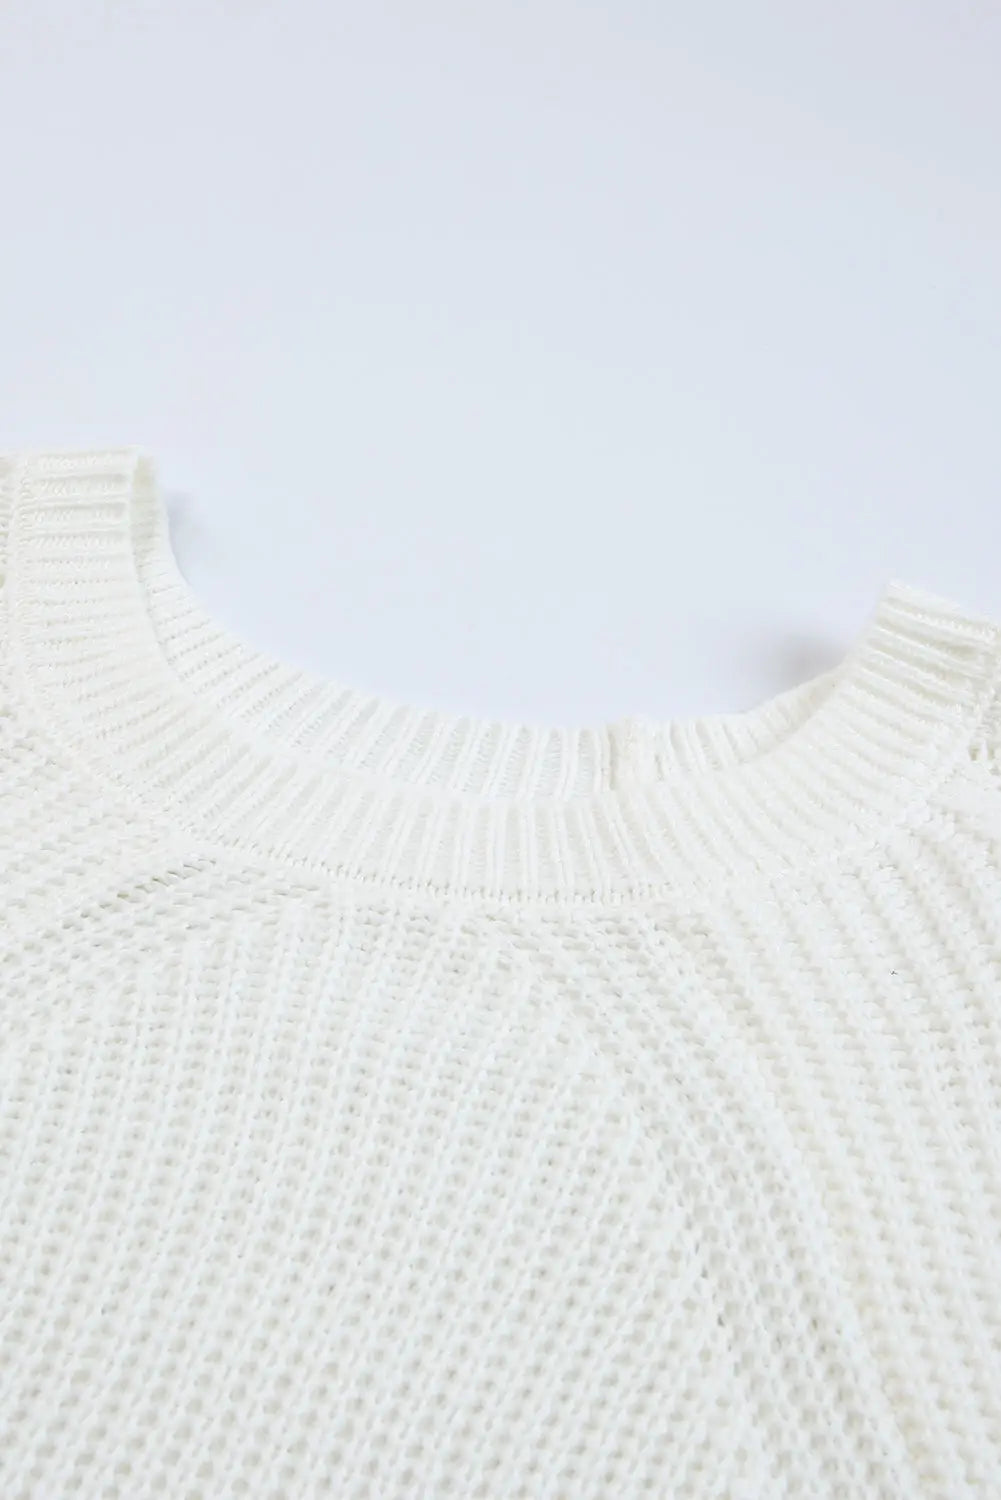 Gray hollow-out puffy sleeve knit sweater - sweaters & cardigans